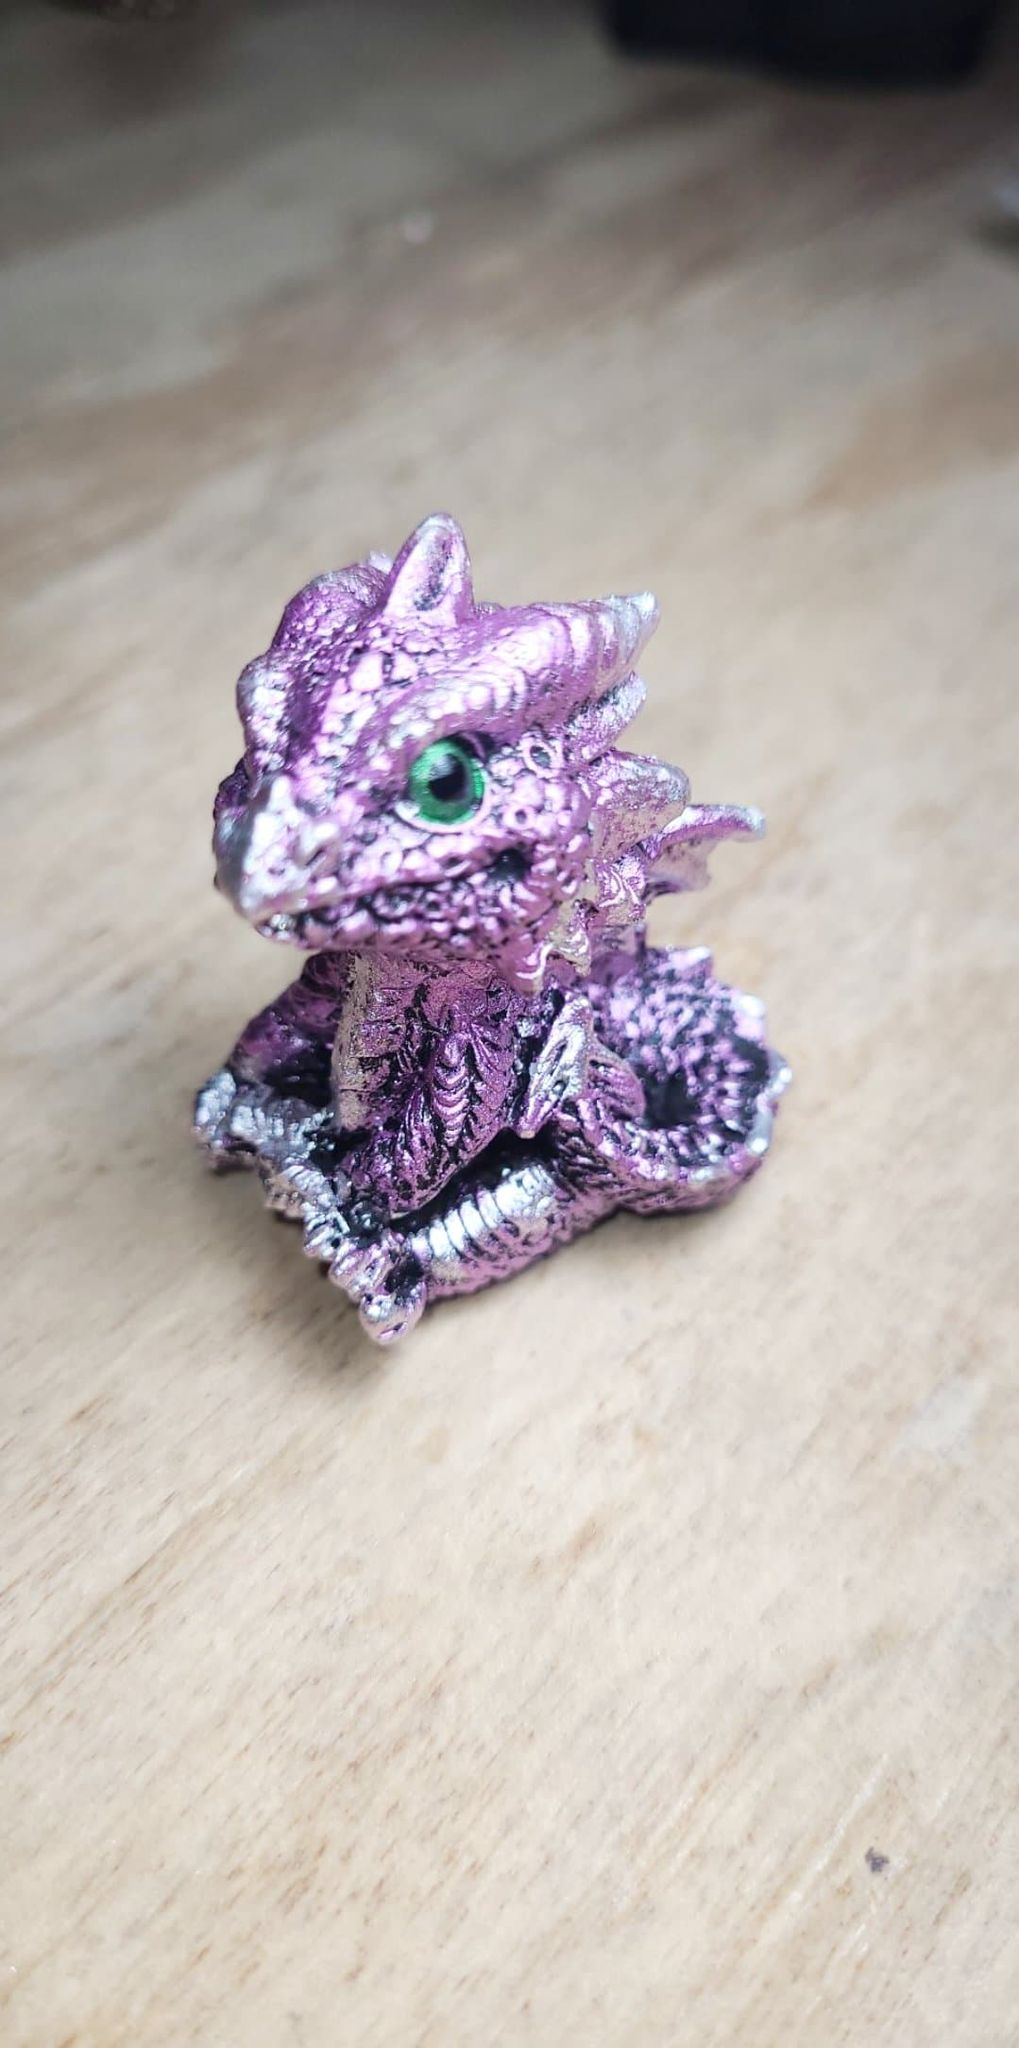 Playful Baby Dragon Hatchlings